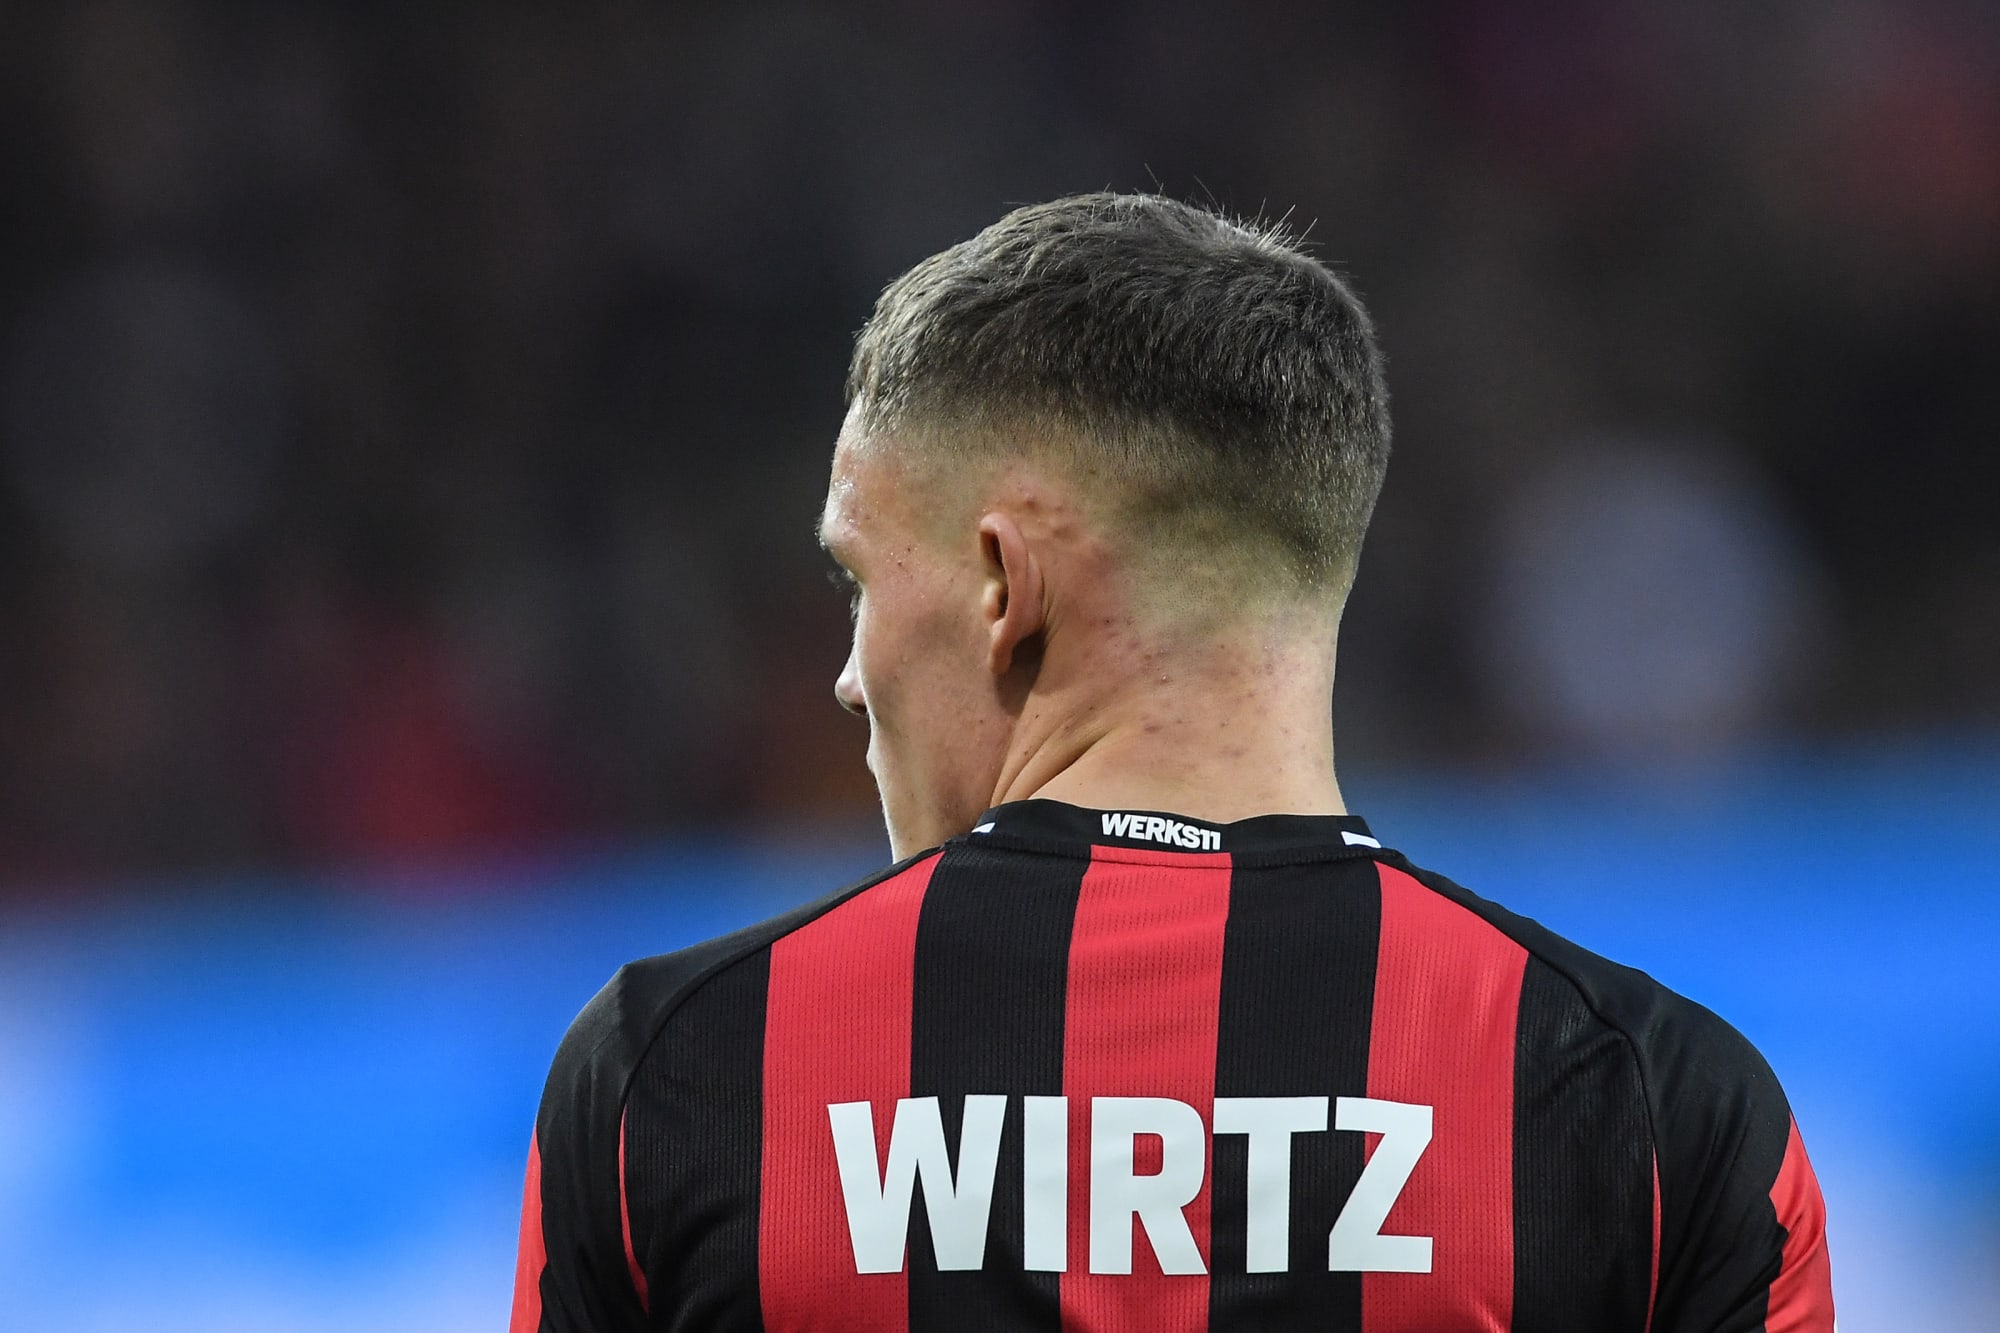  Florian Wirtz, a young German professional footballer who plays as an attacking midfielder for Bundesliga club Bayer Leverkusen and the Germany national team, is seen from behind wearing his team's jersey with 'Wirtz' printed on it.